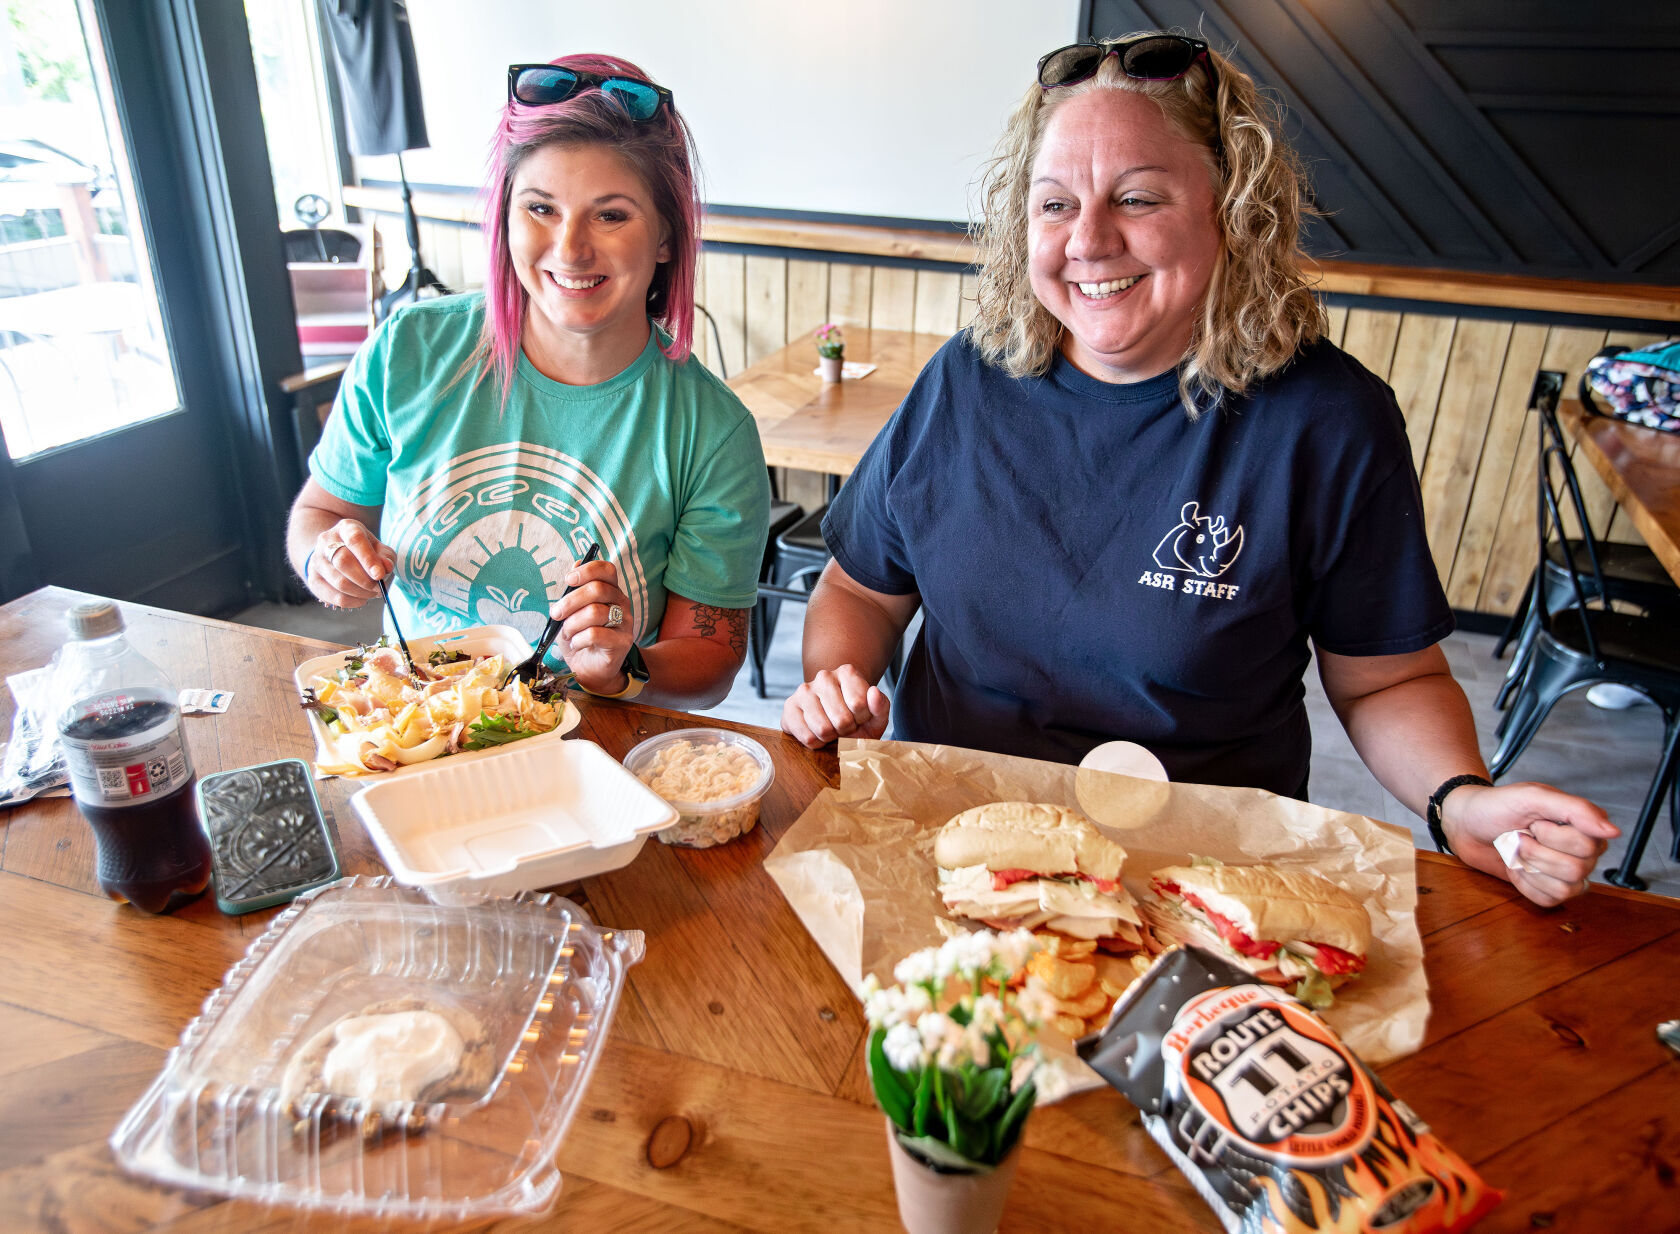 New Front Royal eatery offers fresh, homemade quick bites